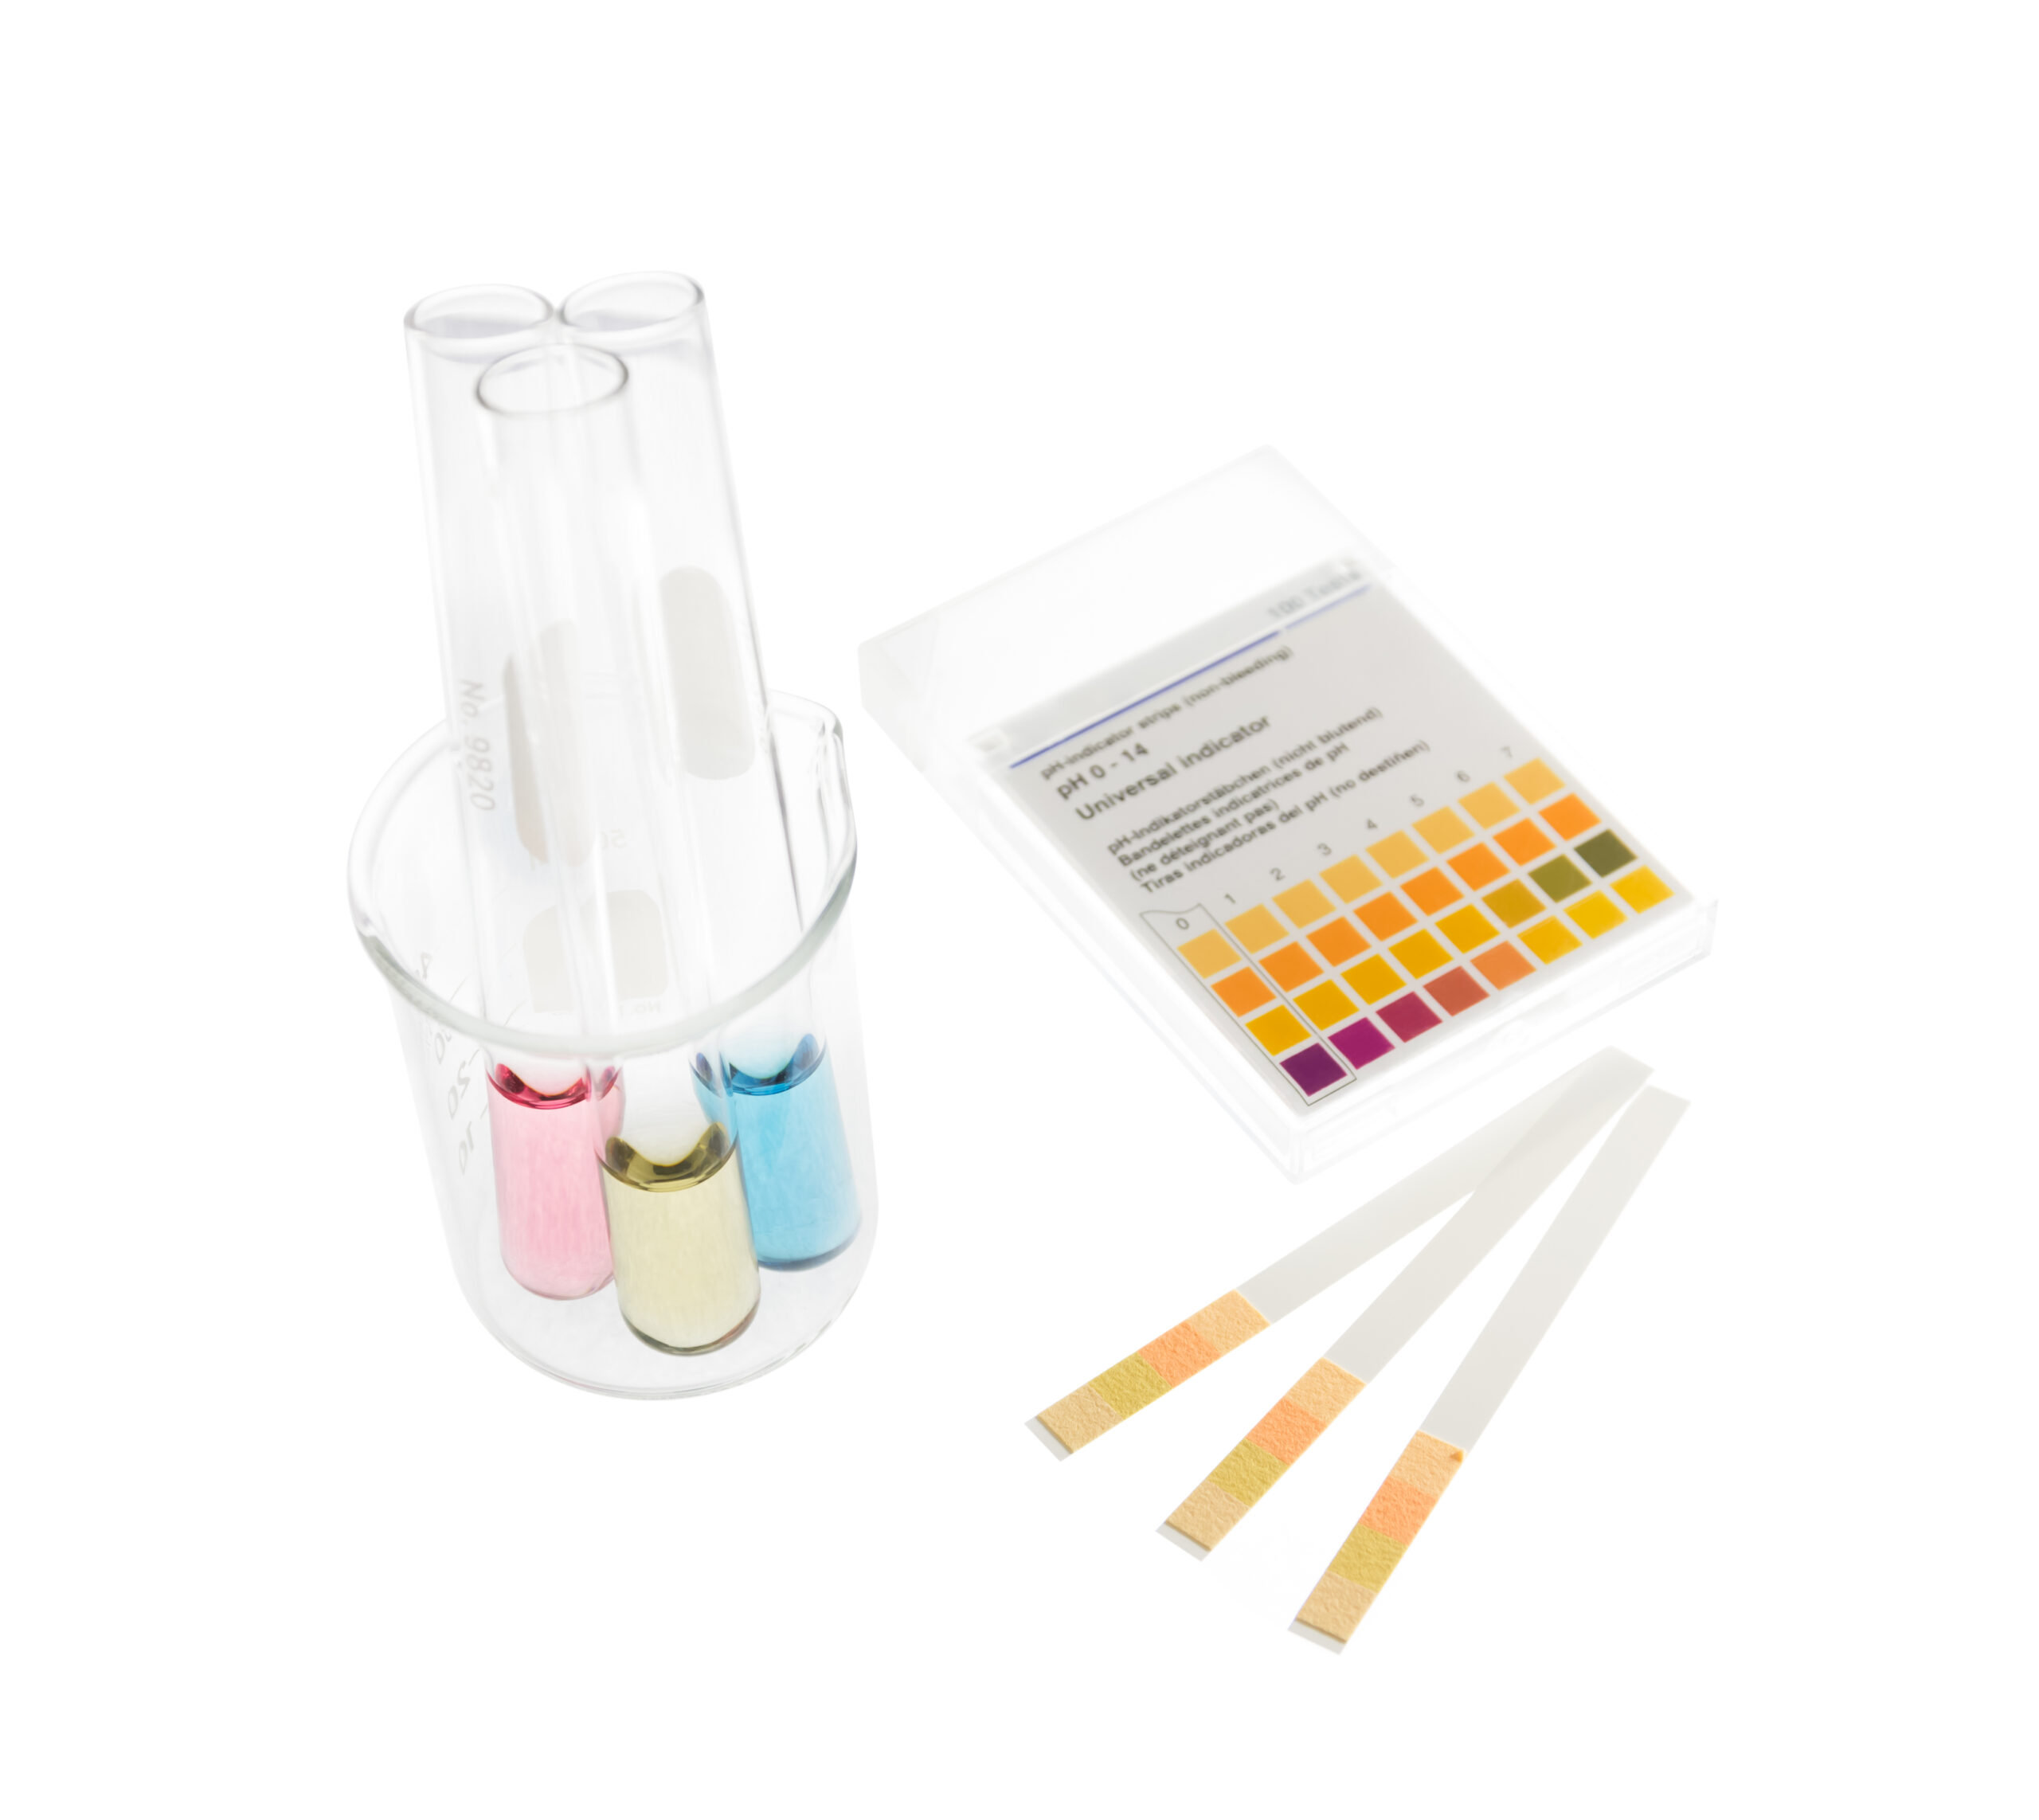 A pool water testing kit for measuring the pH level of pool water, featuring test reagents and color charts to ensure proper water balance.